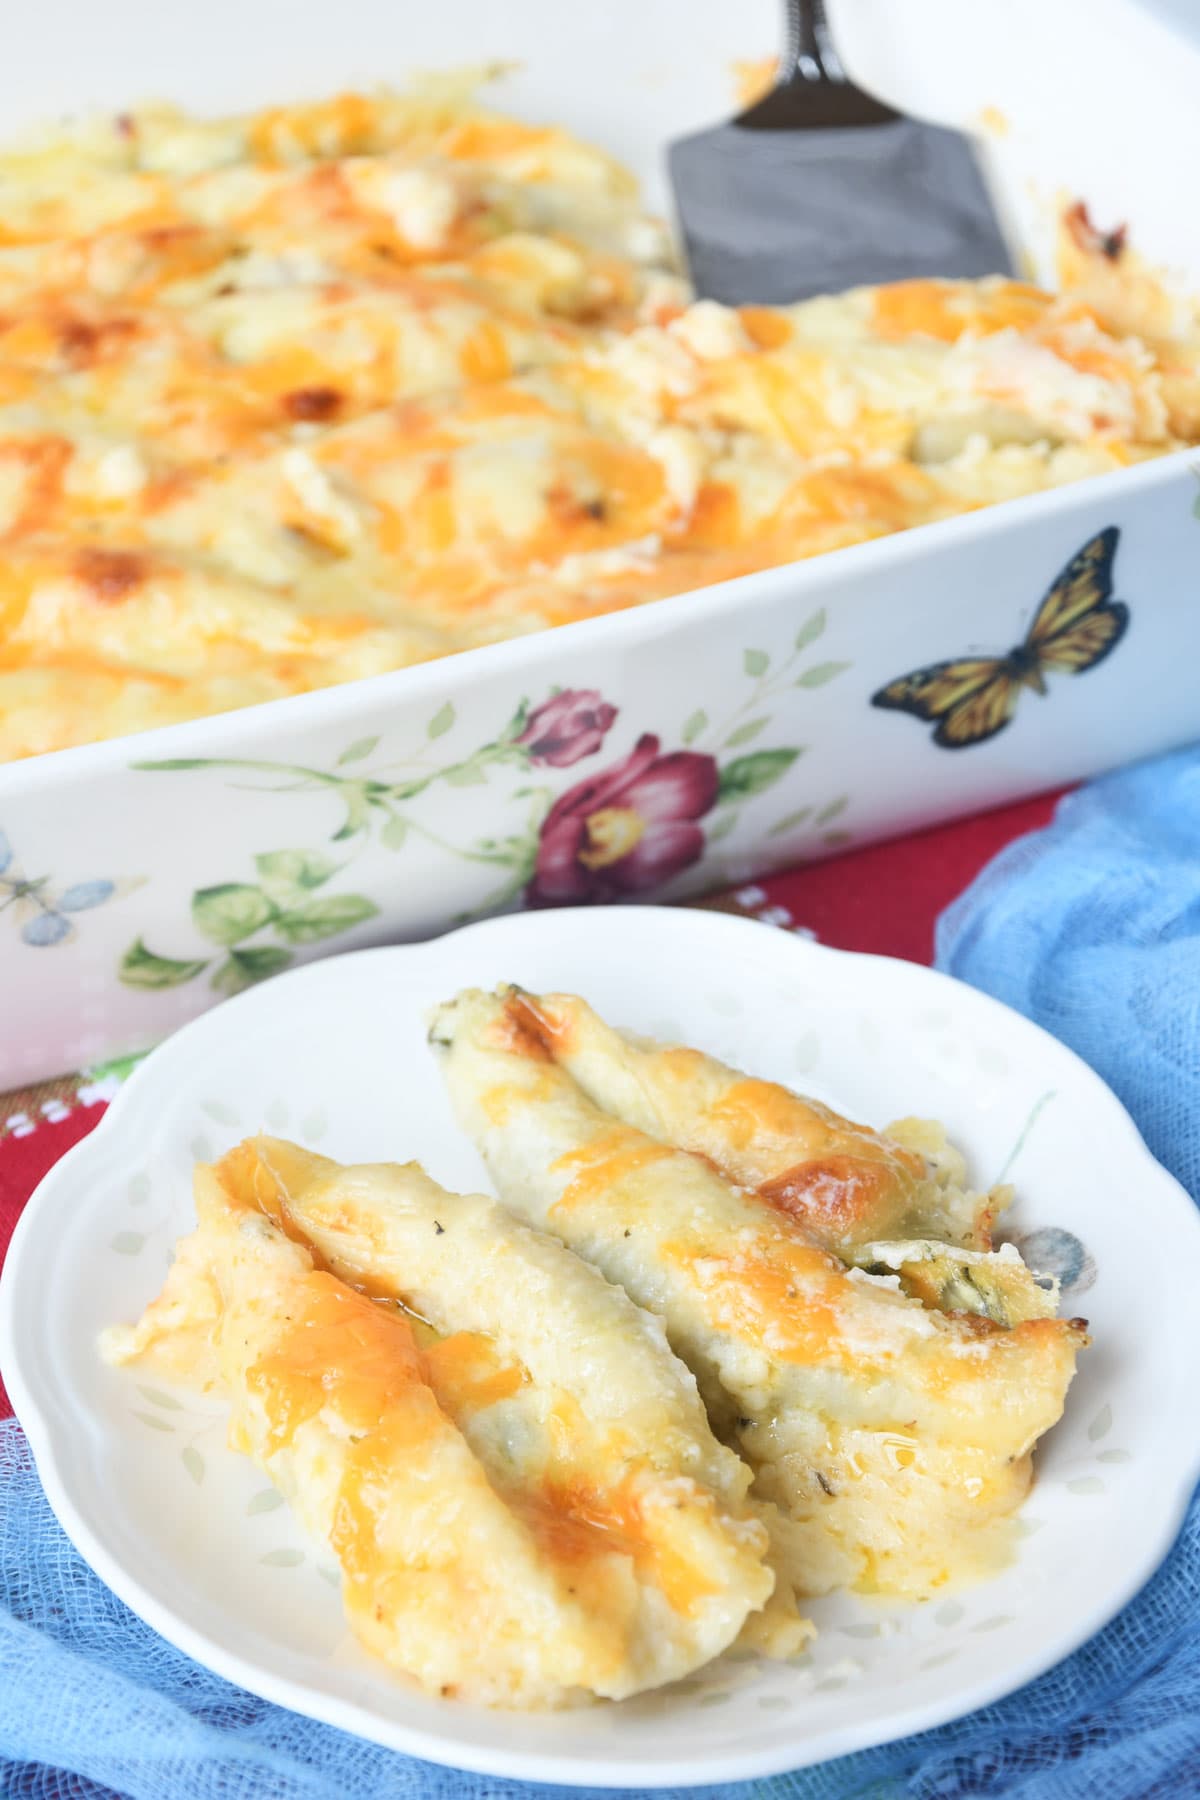 Stuffed pasta shells with spinach and cream cheese.